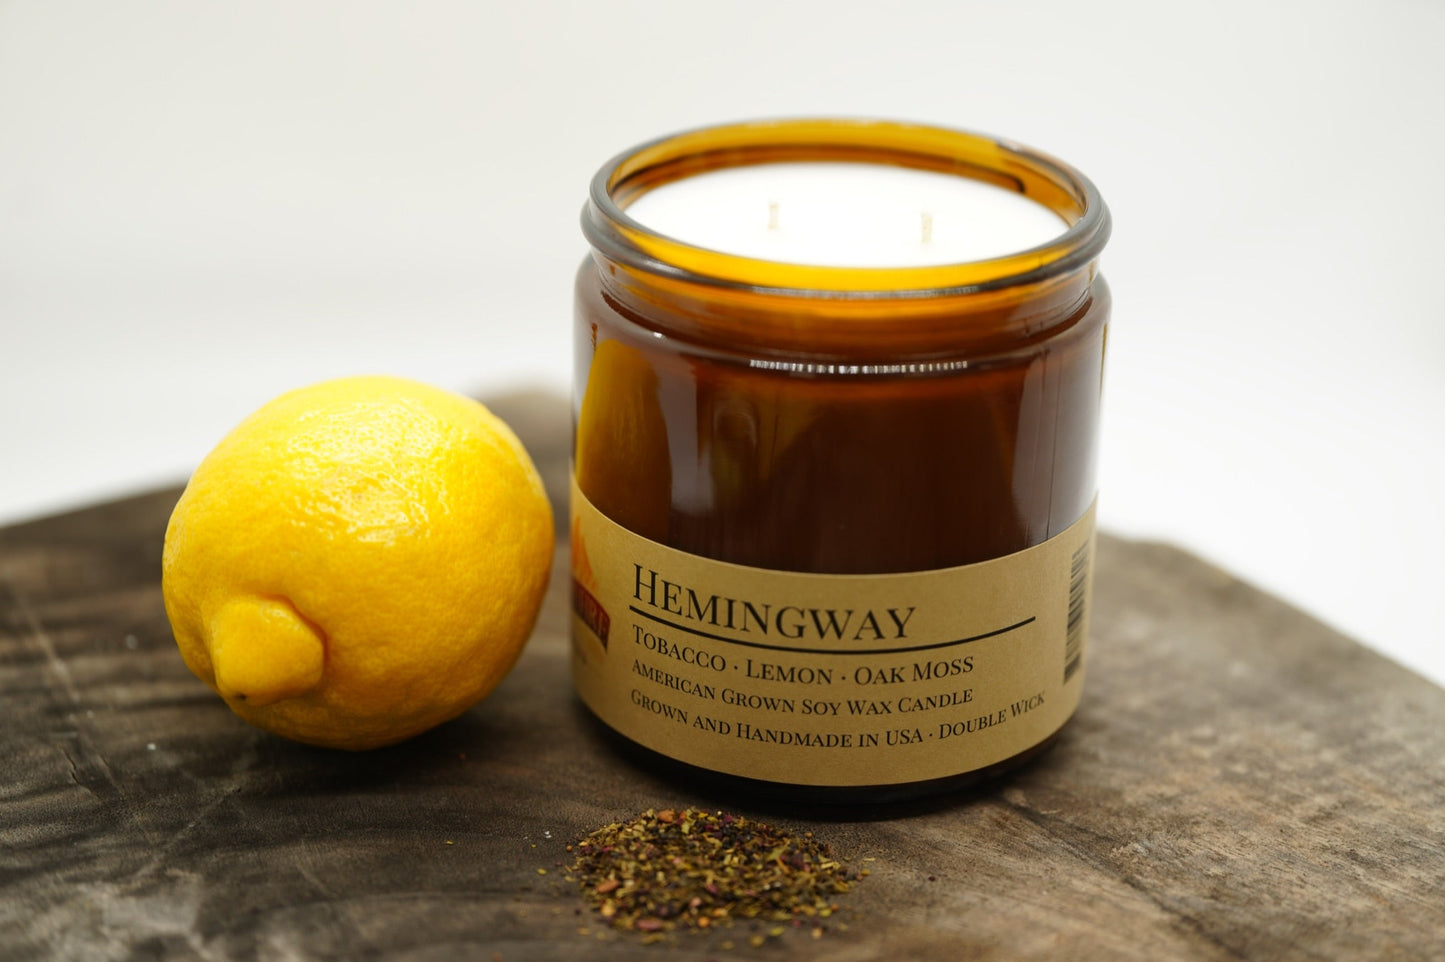 Hemingway Soy Candle | 16 oz Double Wick Amber Apothecary Jar